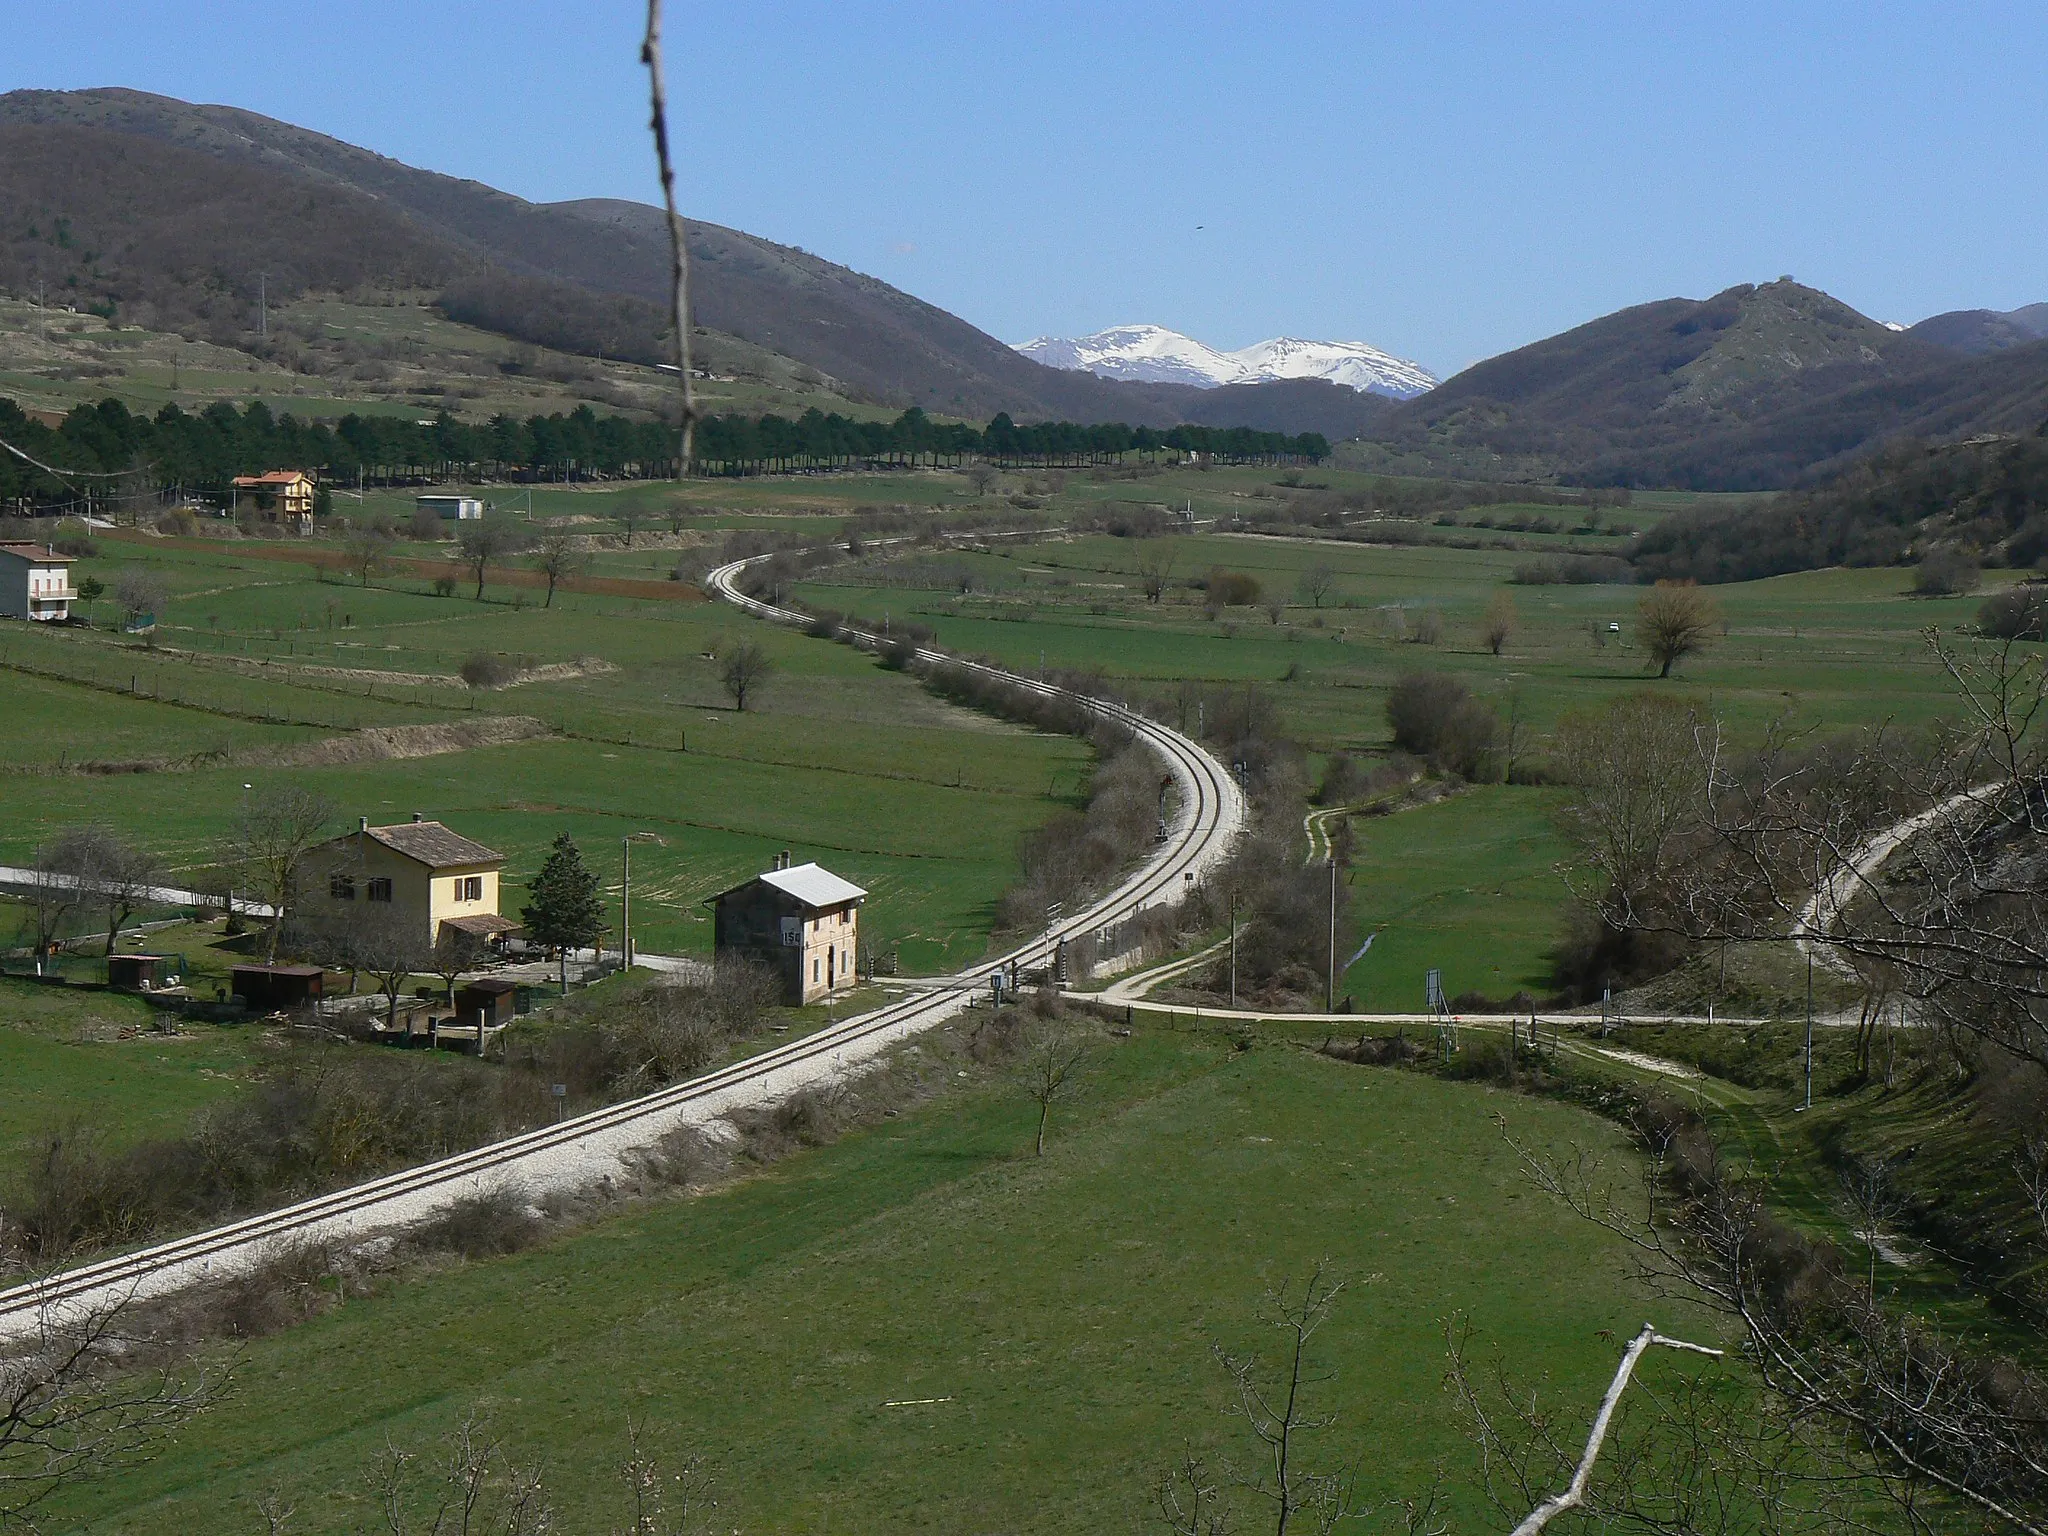 Photo showing: View of Sella di Corno plateau, in the point where lies the border between Lazio and Abruzzo, Italy. The tree-lined street at left is state highway n. 17, while on foreground Terni-Rieti-L'Aquila railway can be seen (trait between Rocca di Corno station and Sella di Corno station, which is the highest point of the line at 989 metres on the sea level) with a level crossing without barriers and a watchman's house indicating the kilometer 150.